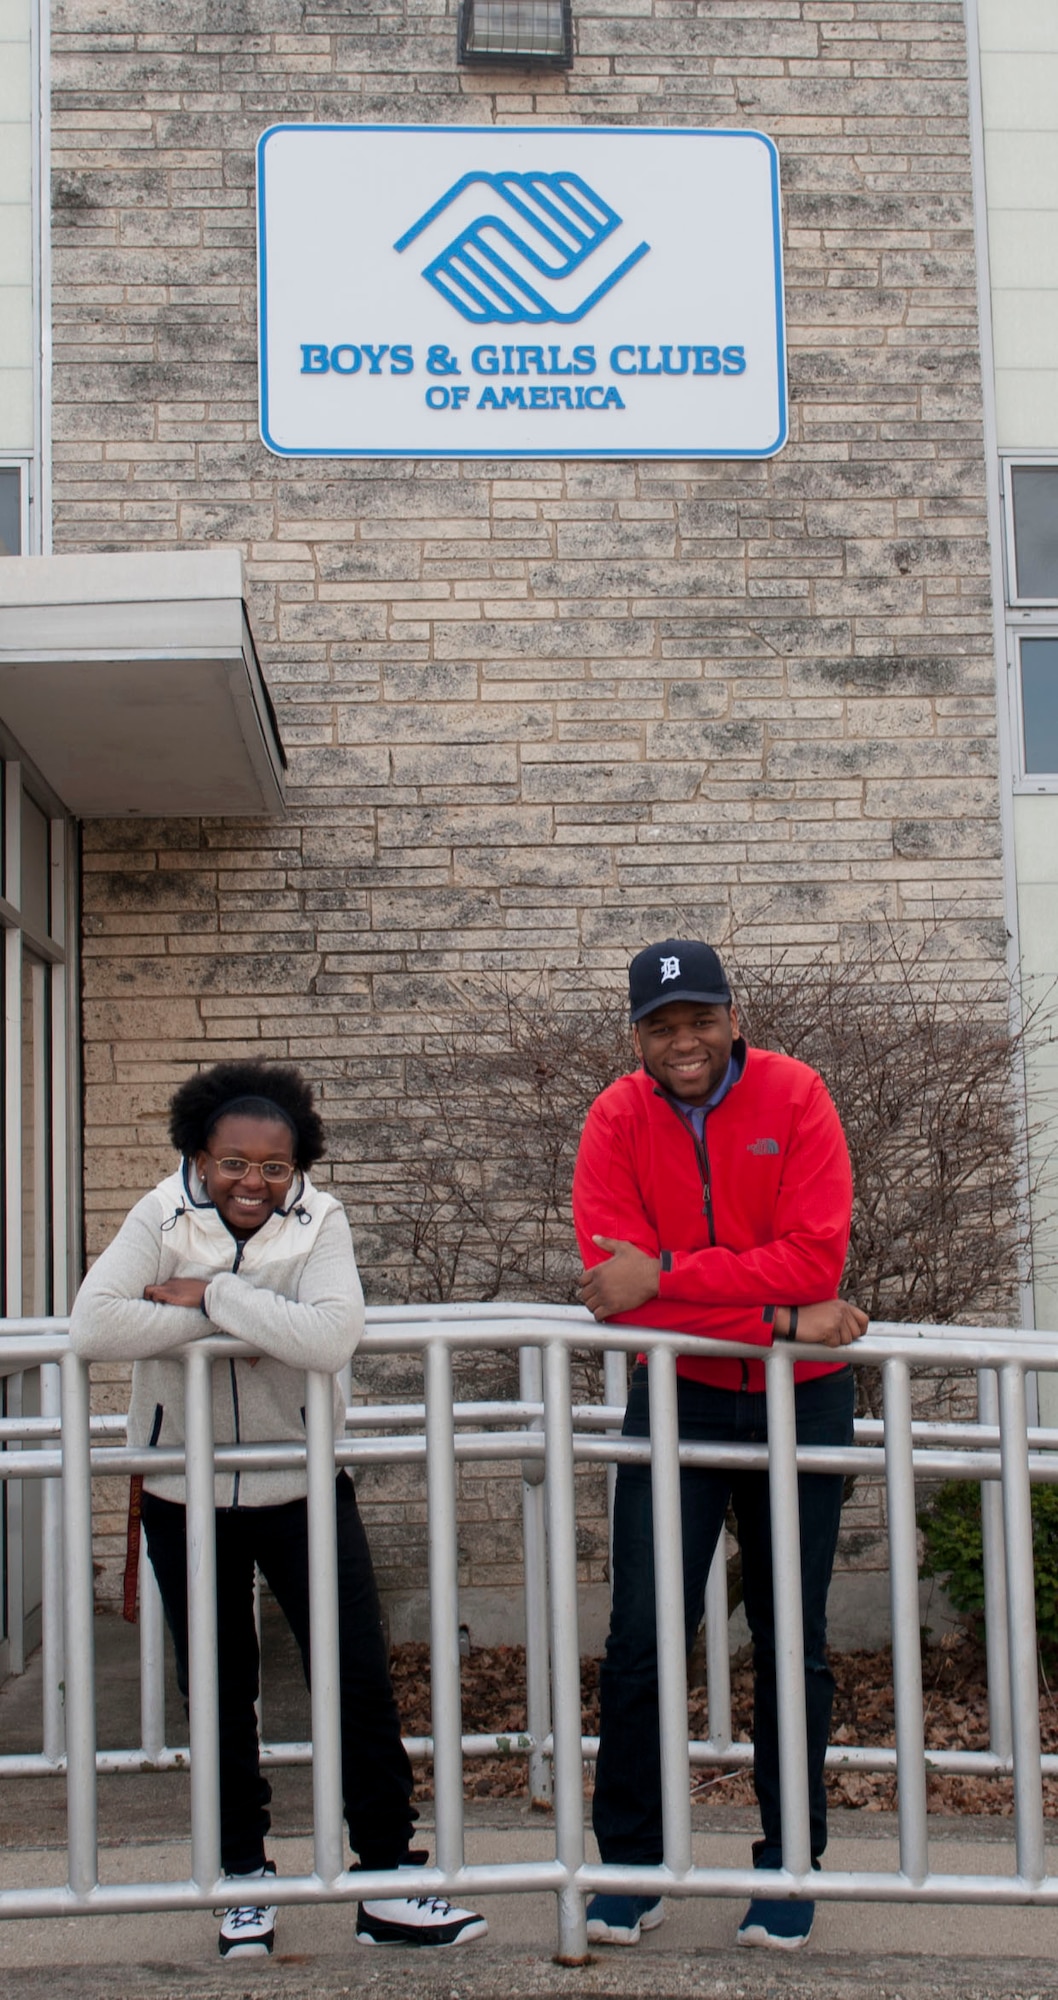 Senior Airman Ashley Adams and Senior Airman Nathan Dillard, members of the National Air and Space Intelligence Center, arrive at the Dayton, Ohio Boys and Girls Clubs of America Monday, Feb. 8, 2016 as part of the Justice Mentoring Program. The group sends five to eight members to volunteer every other Friday where they help area under-privileged children through mentoring and mediation. (U.S. Air Force photo by Senior Airman Samuel Earick)